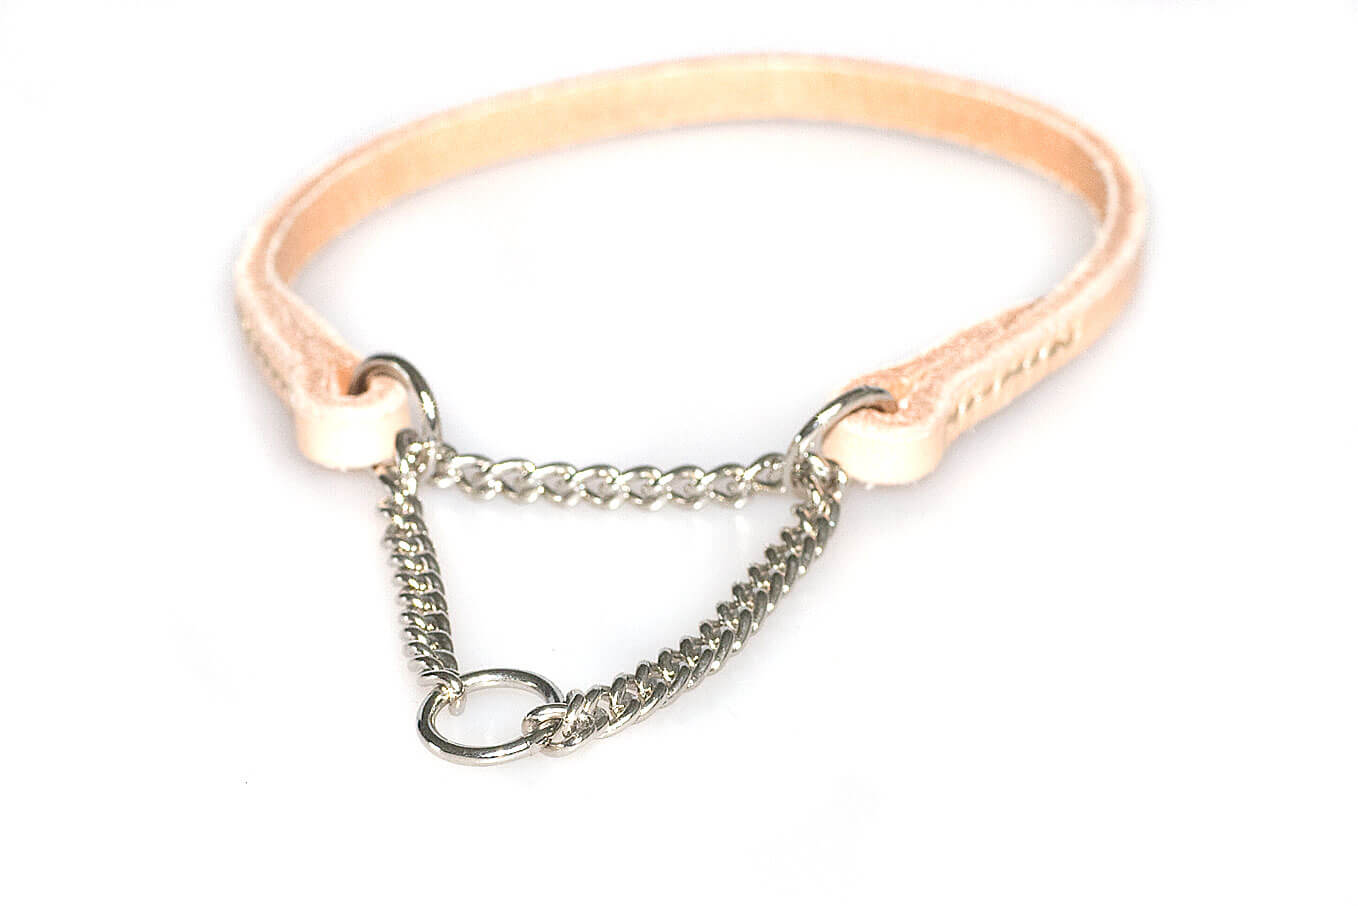 Beige leather martingale dog show collar